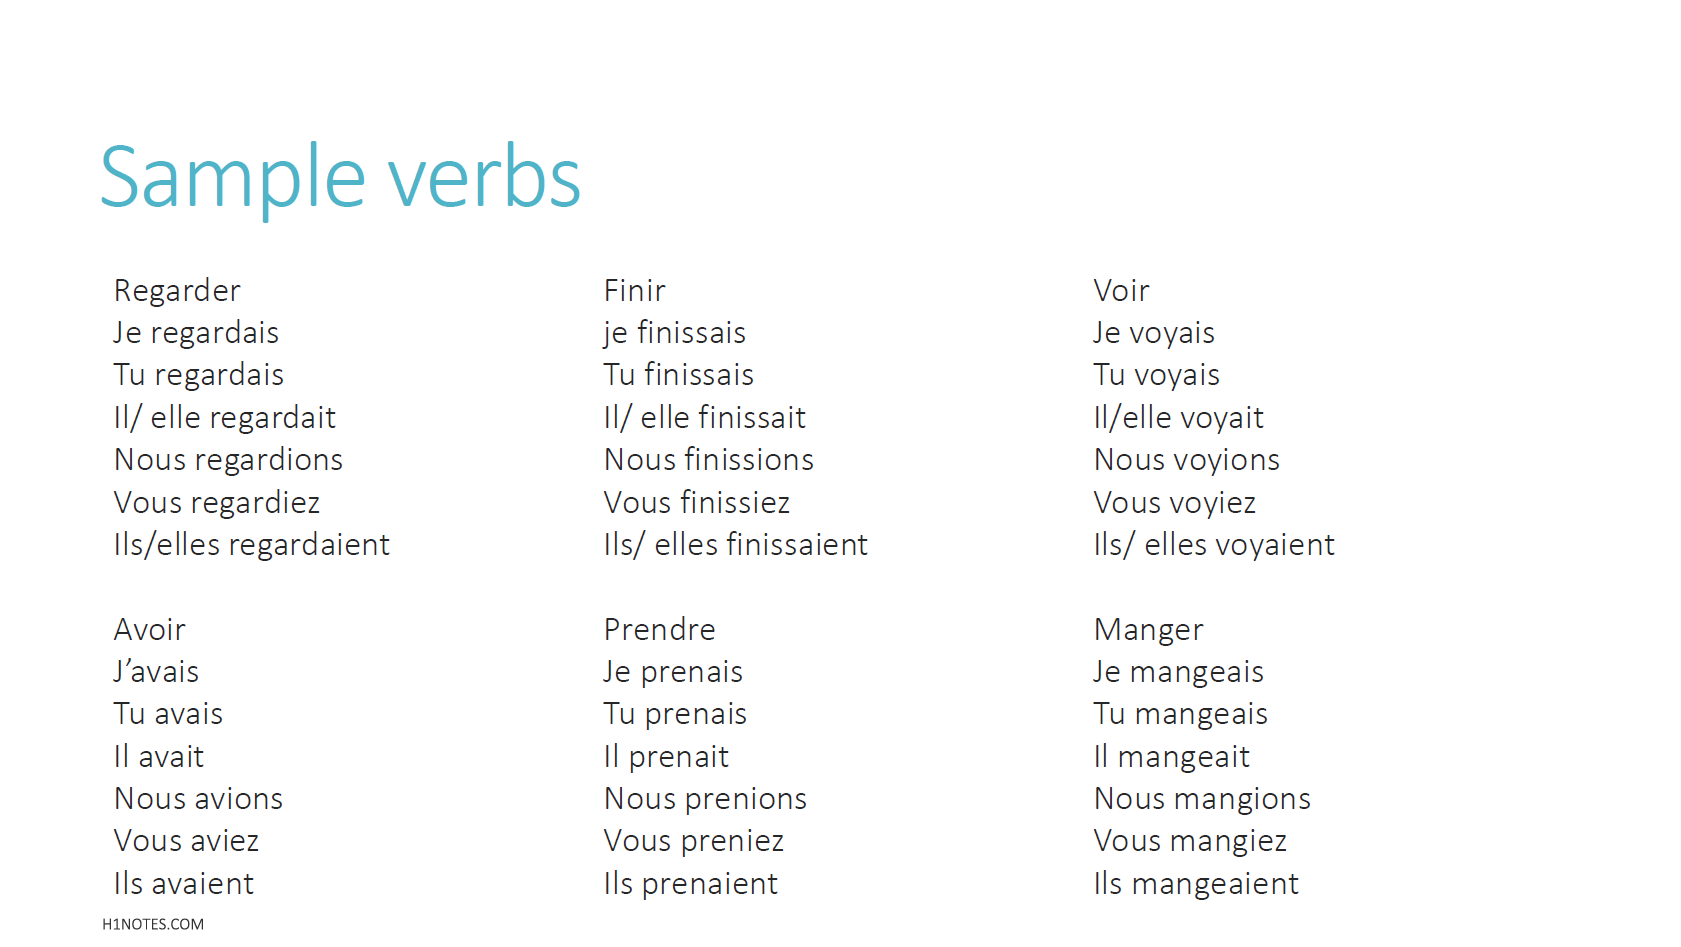 H1 Notes French Notes Sample Verbs